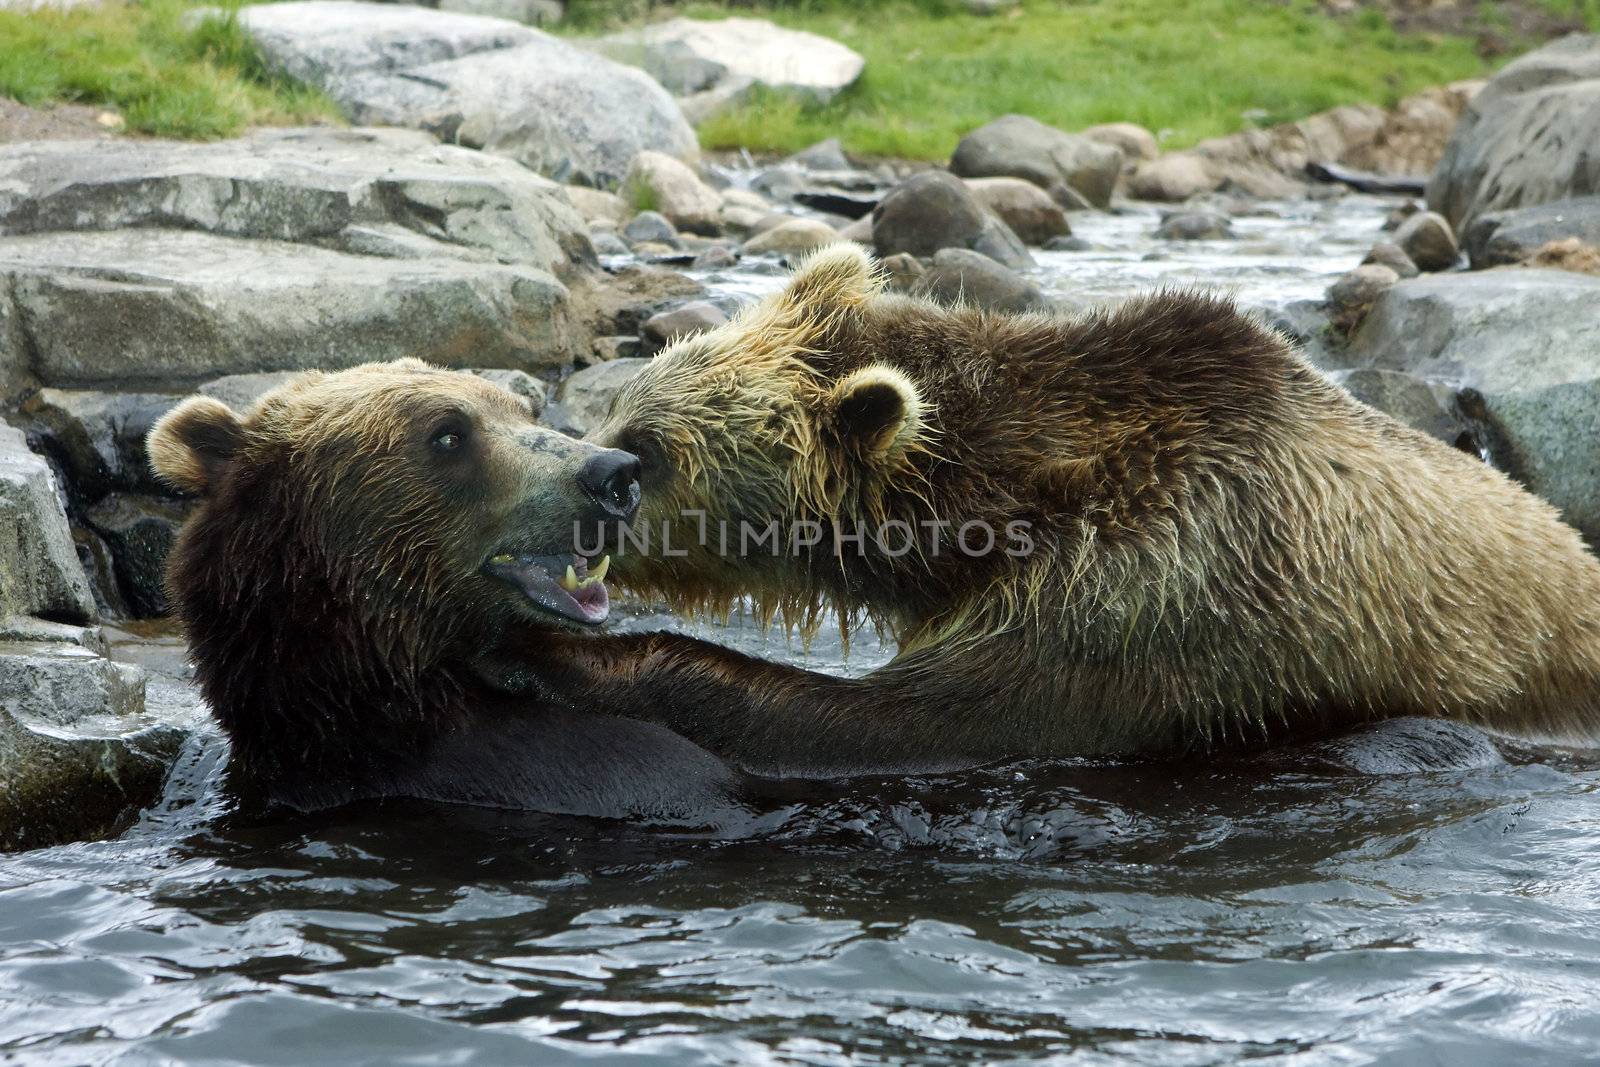 Grizzly Bears go at each other in a playful fight.